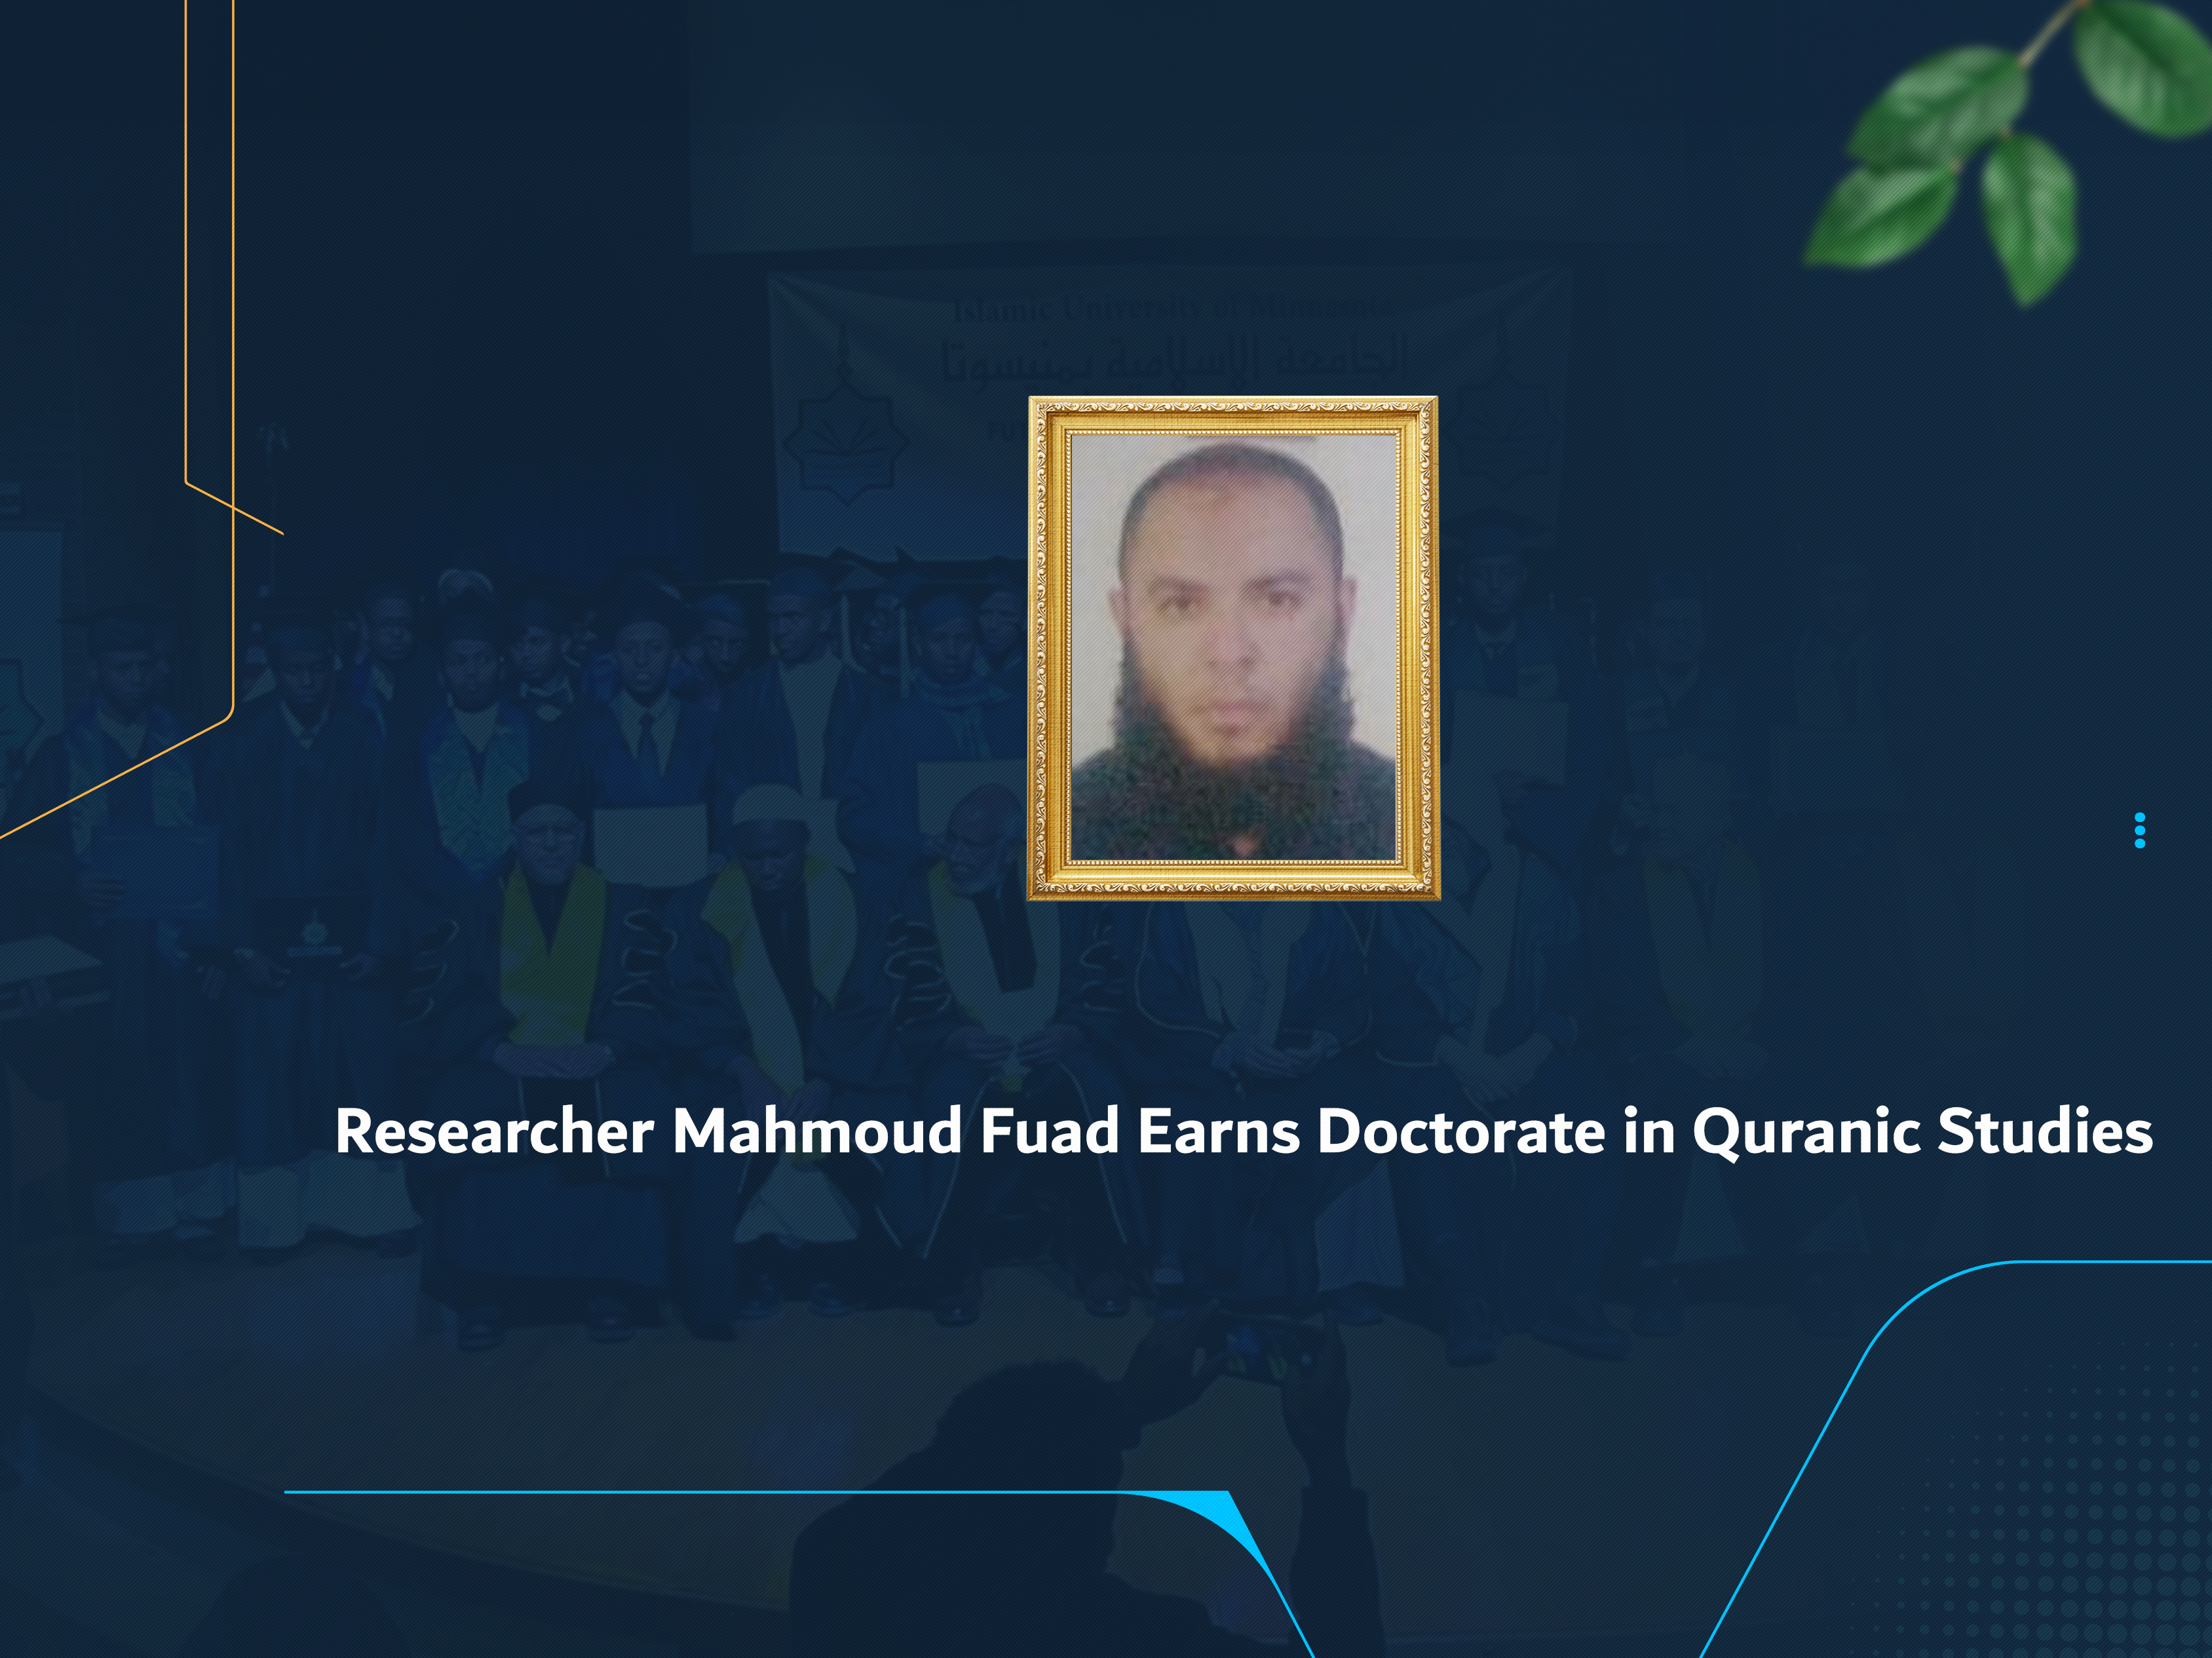 Researcher Mahmoud Fuad Earns Doctorate in Quranic Studies